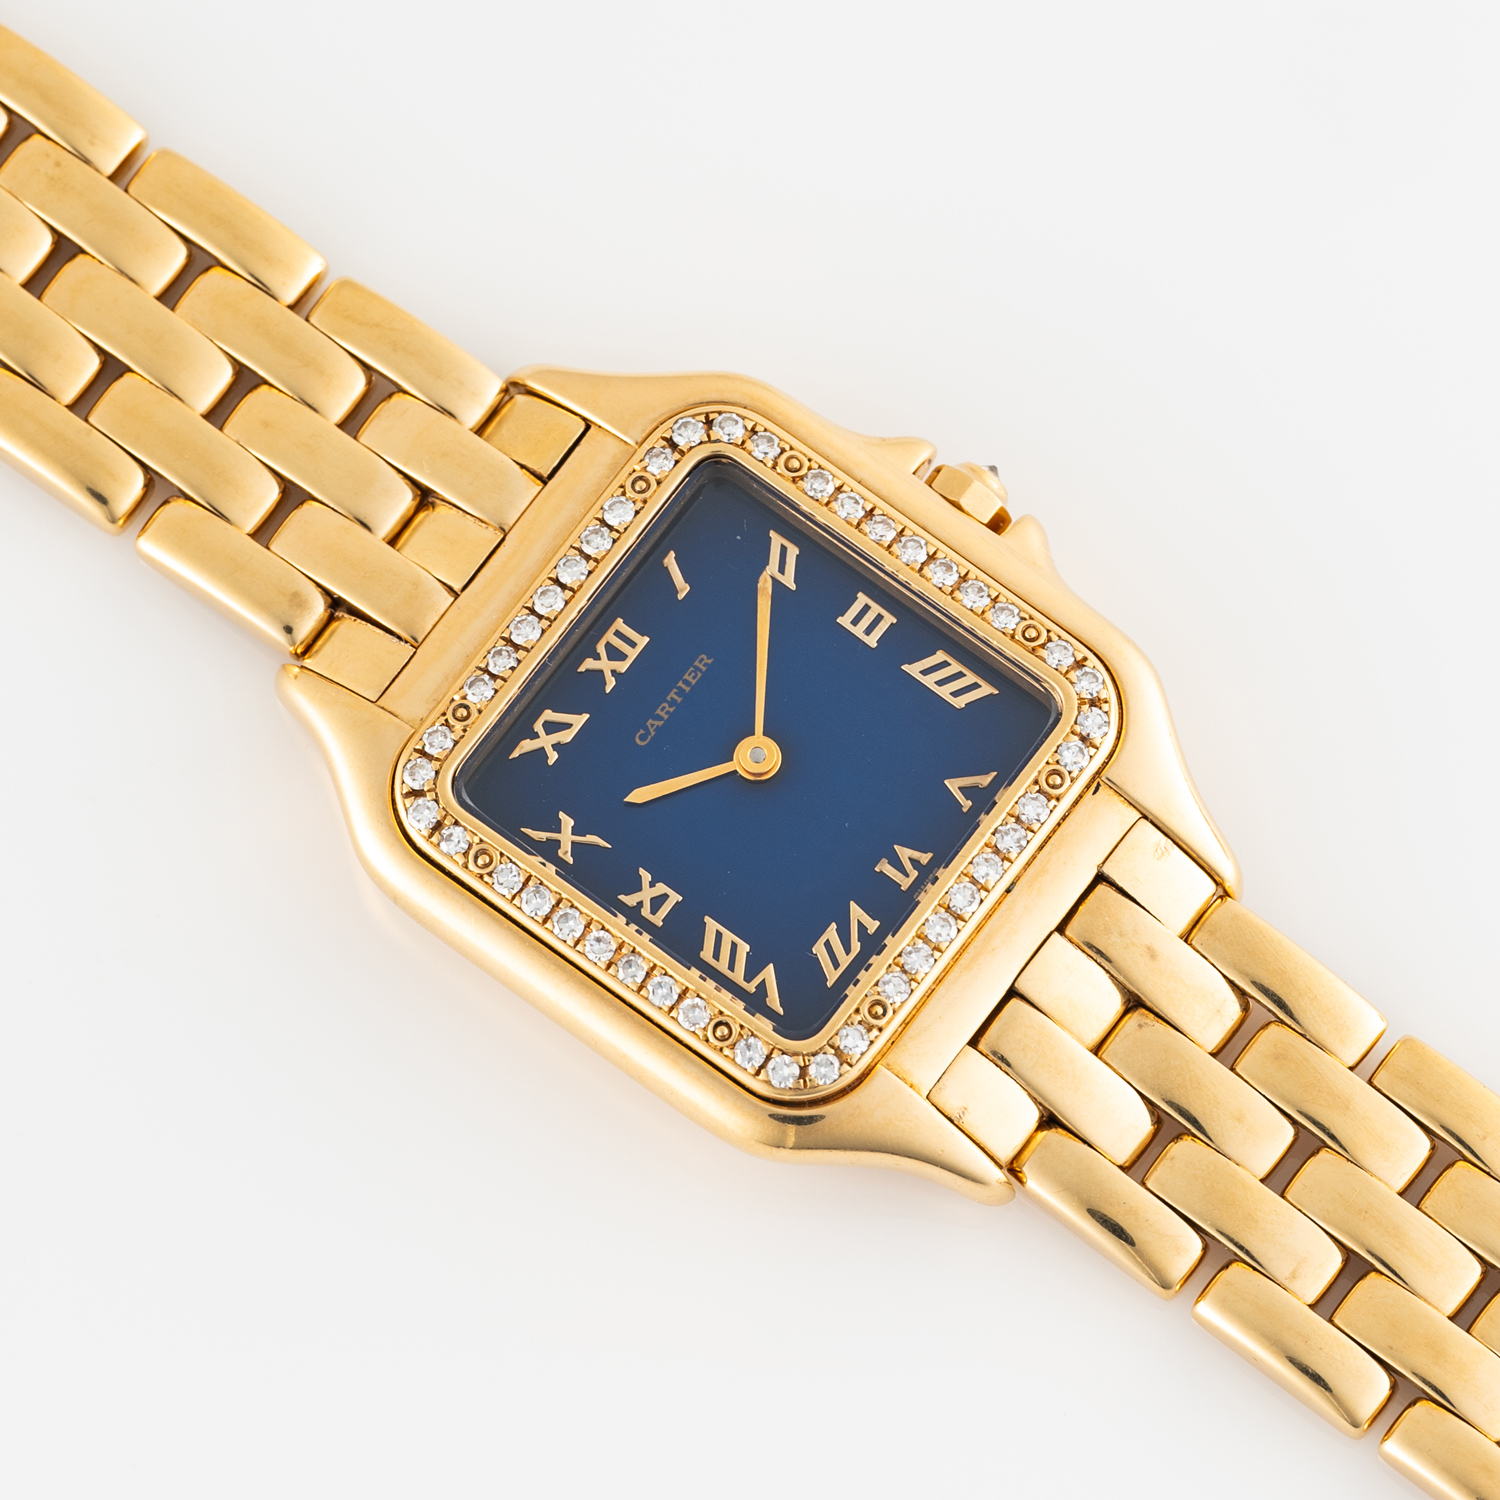 A RARE GENTLEMAN'S SIZE 18K SOLID GOLD & DIAMOND CARTIER PANTHERE BRACELET WATCH CIRCA 1990, REF. - Image 4 of 9